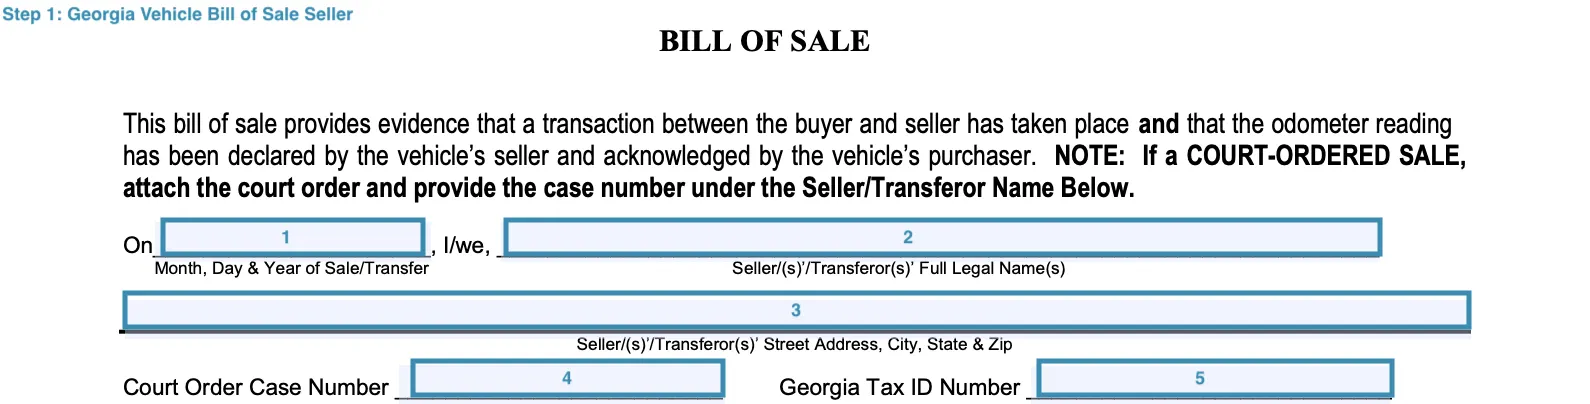 Section for filling out seller's particulars of motor vehicle bill of sale for Georgia